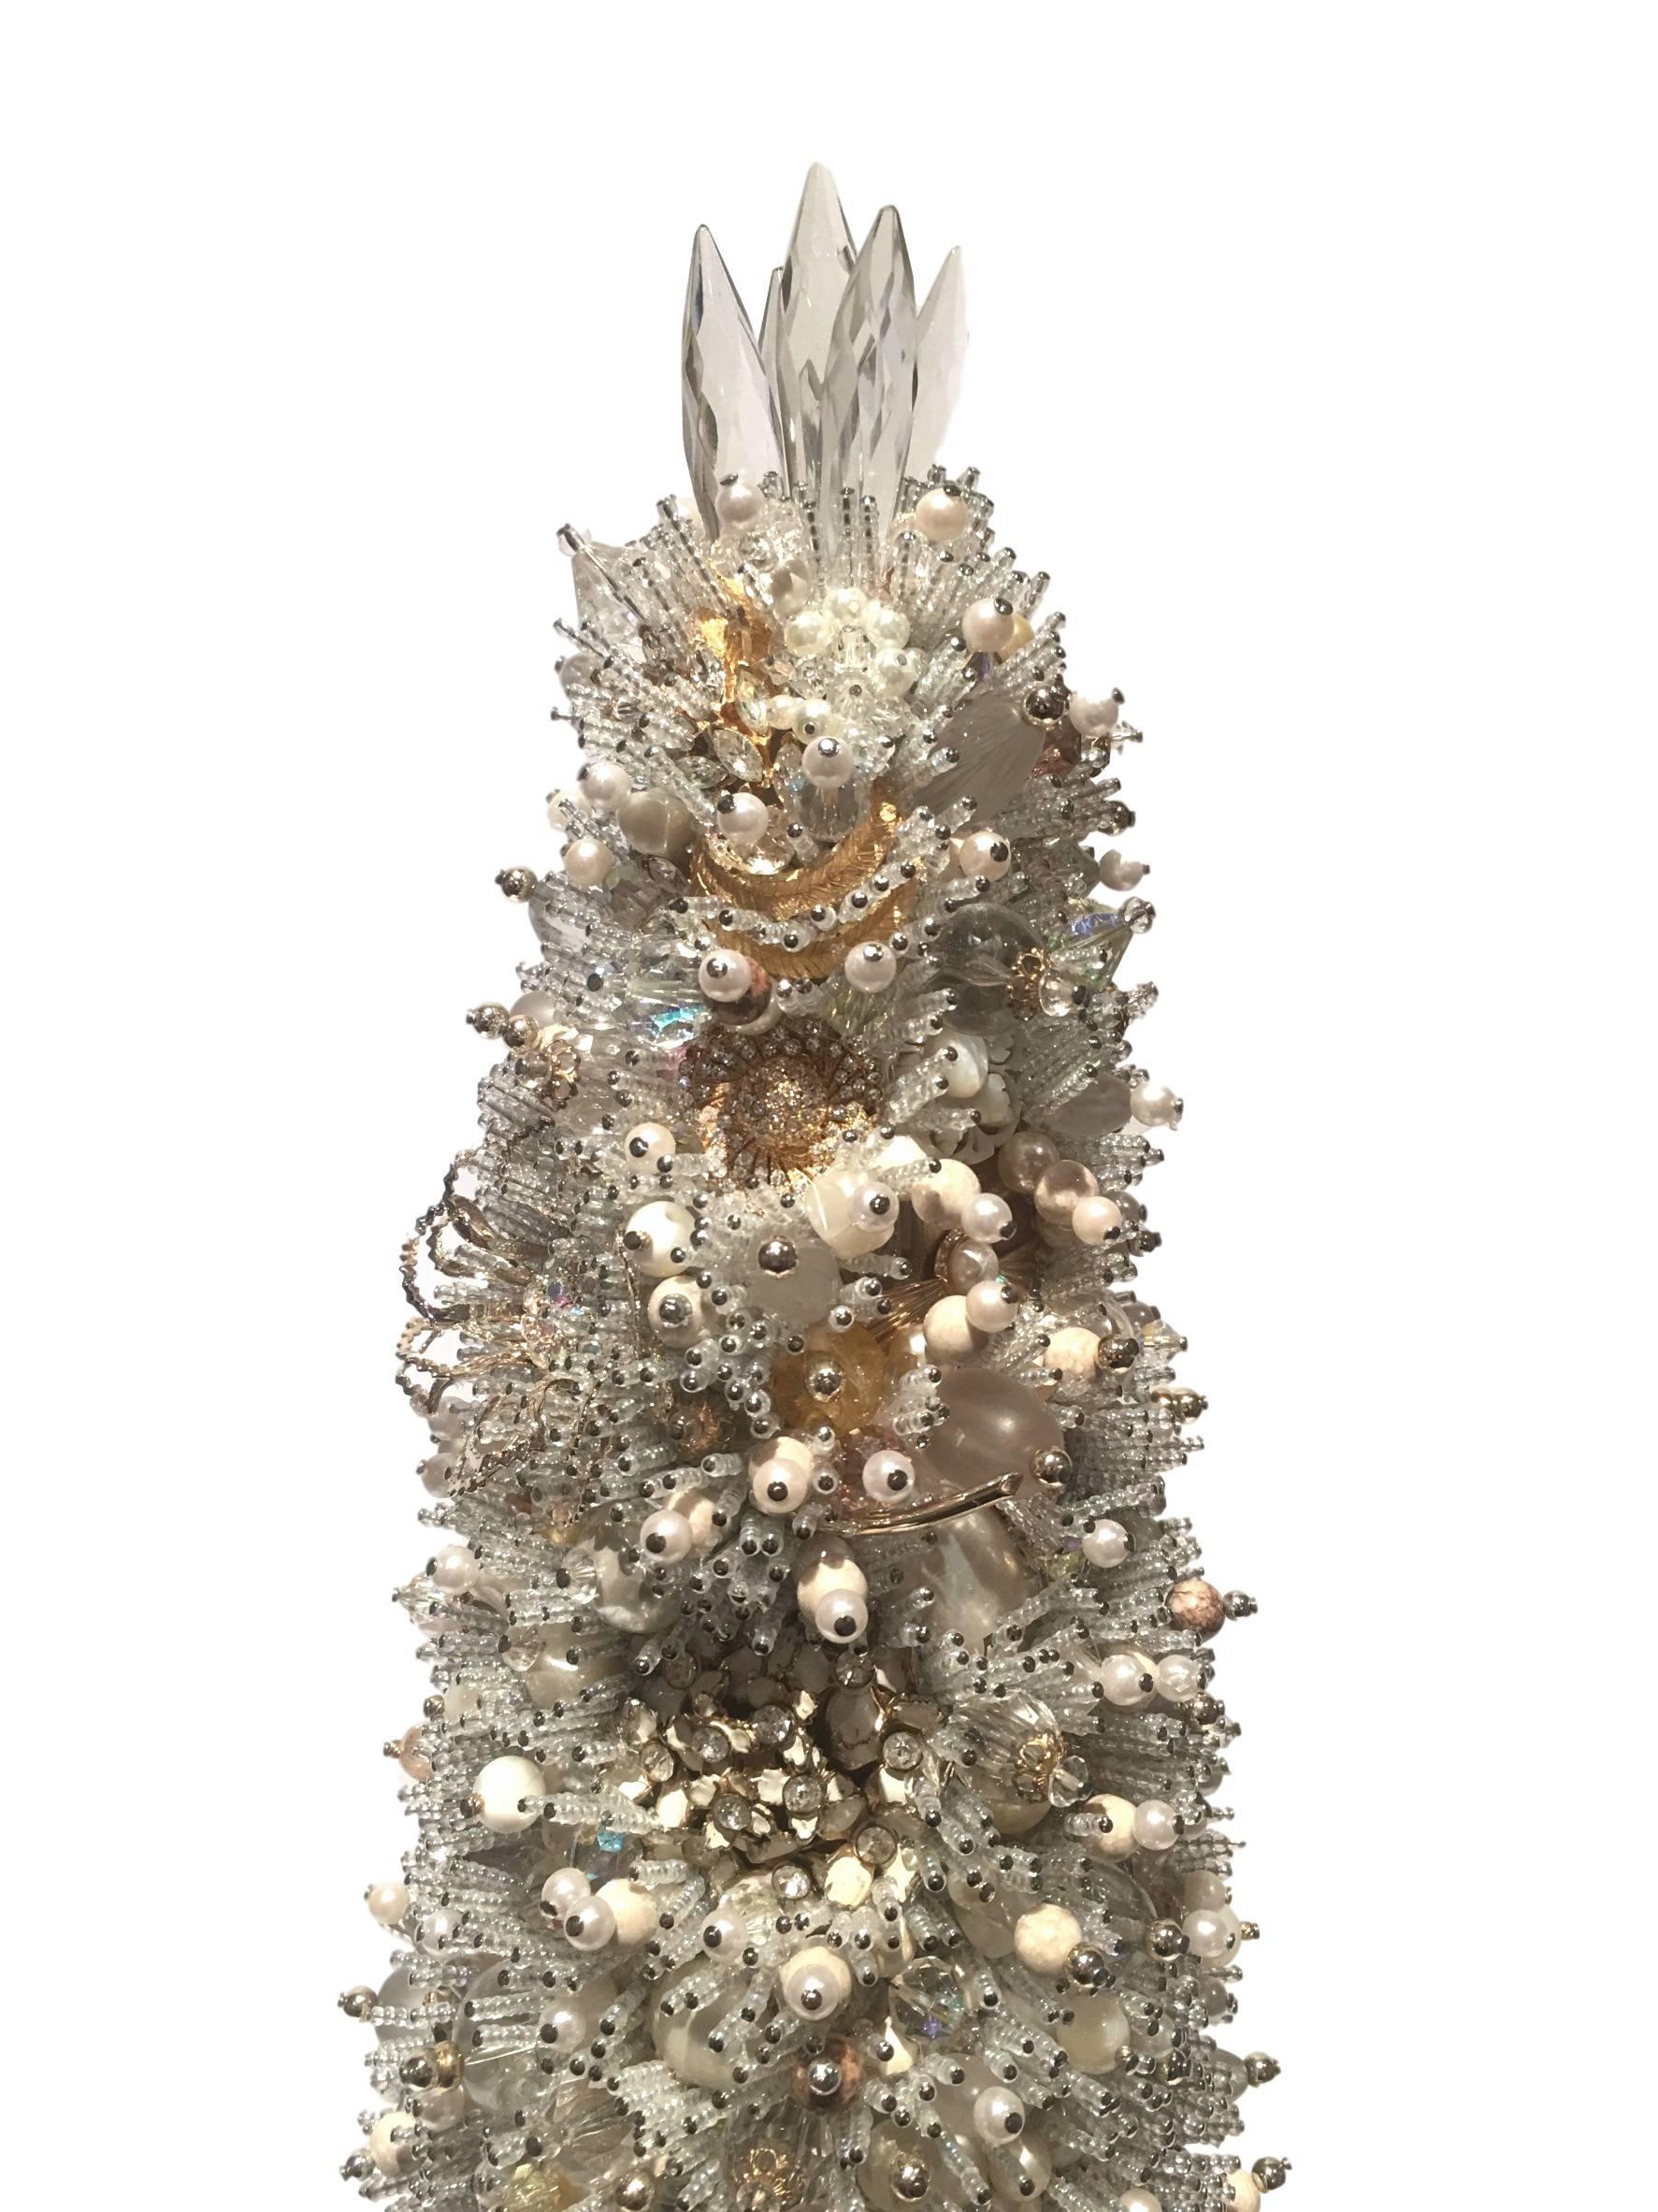 Extra large handmade beaded sculpture by Peyton Hayslip.

These one-of-a-kind pieces are true works of art with each sculpture containing antique, vintage and precious jewels, brooches, pearls and seed beads. 

Measures: 18.5